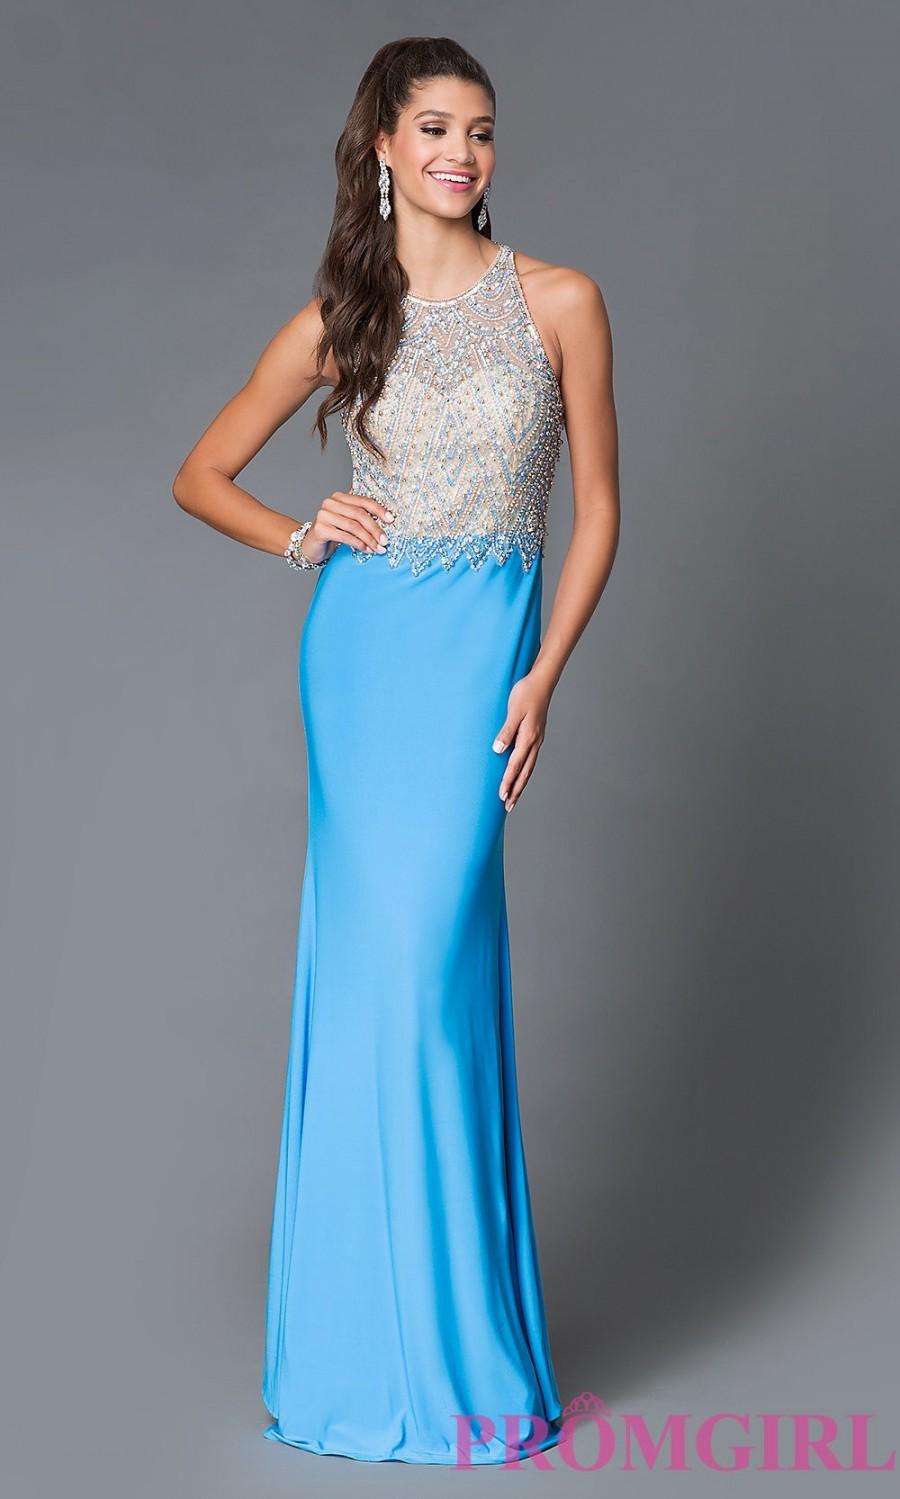 Turquoise Beaded Illusion Bodice Prom Dress - Discount Evening Dresses ...